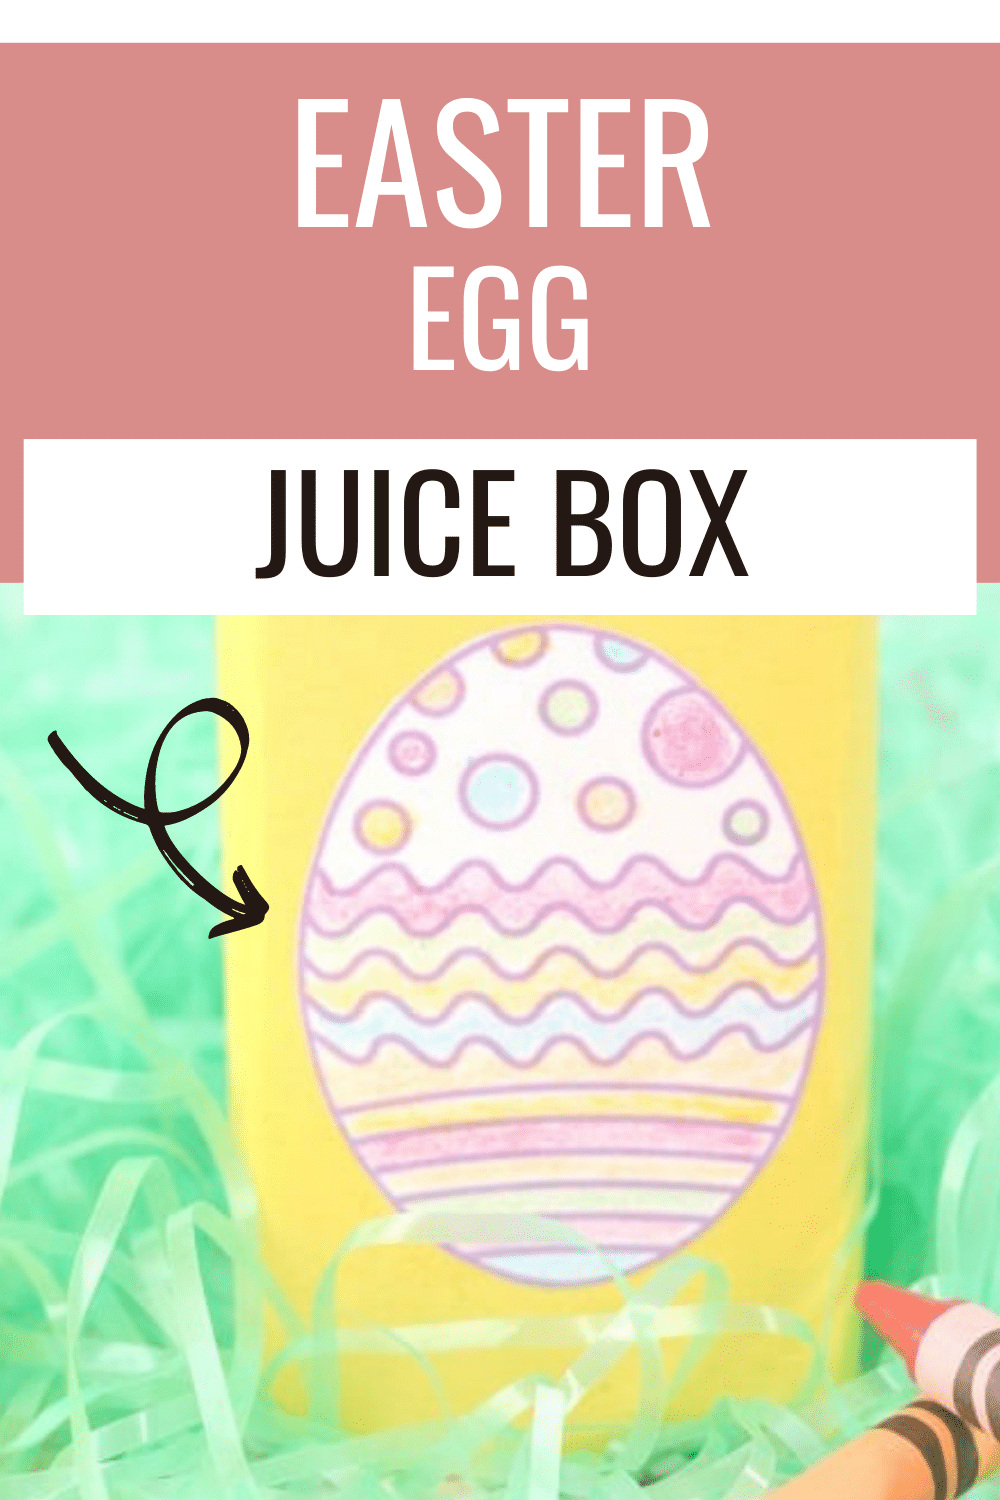 Turn snack time into fun time this Easter with this super easy craft. This Easter egg juice box is a fun addition to your child's Easter basket, lunchbox or class party! #easter #funfoodforkids #easycrafts via @wondermomwannab